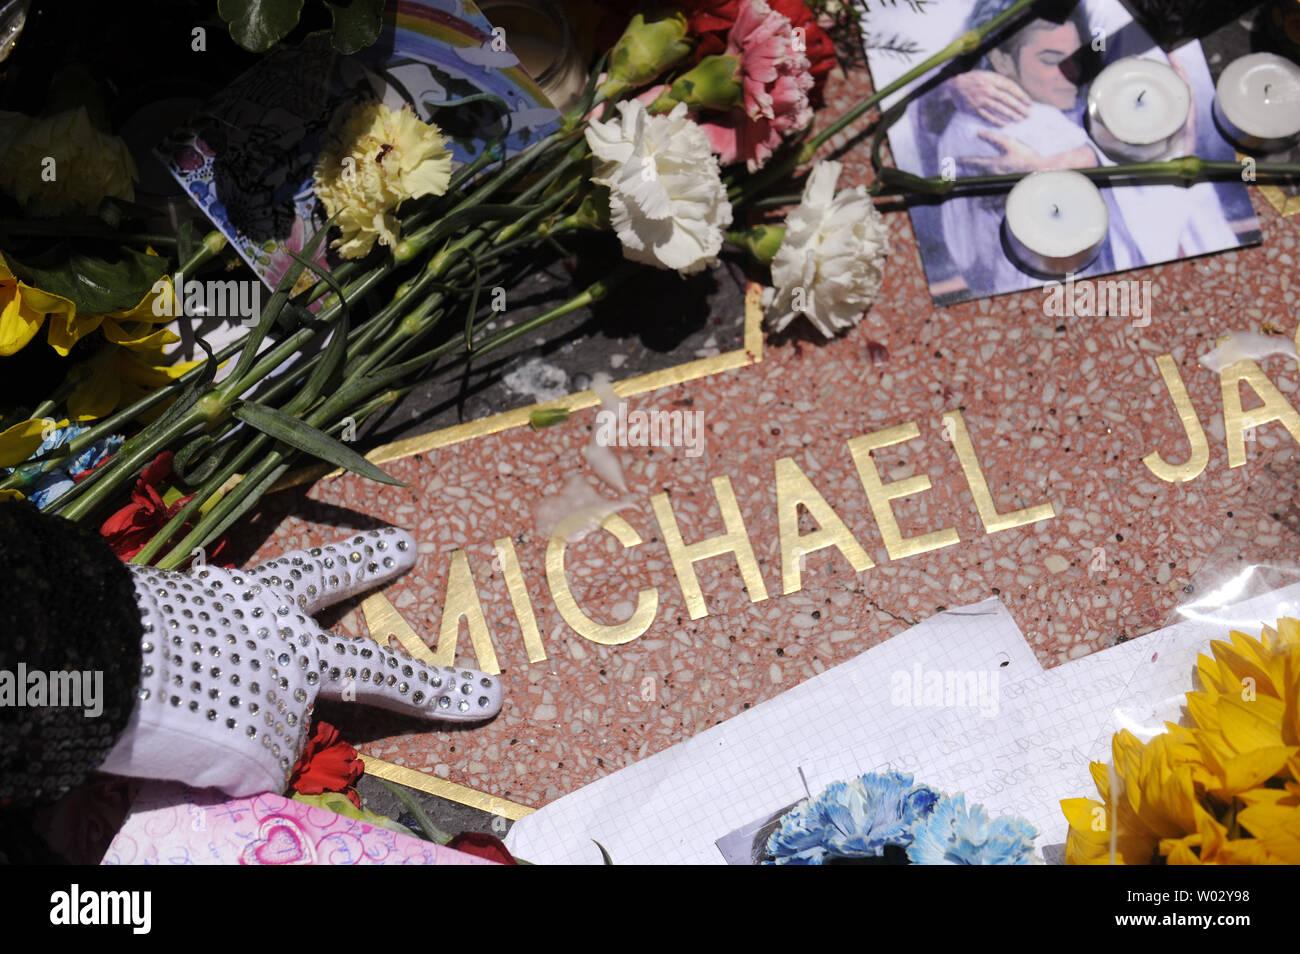 On the one year anniversary of the 'King of Pop's' death, fans visit Michael Jackson's star on the Hollywood Walk of Fame in Los Angeles, California on June 25, 2010.      UPI/ Phil McCarten Stock Photo